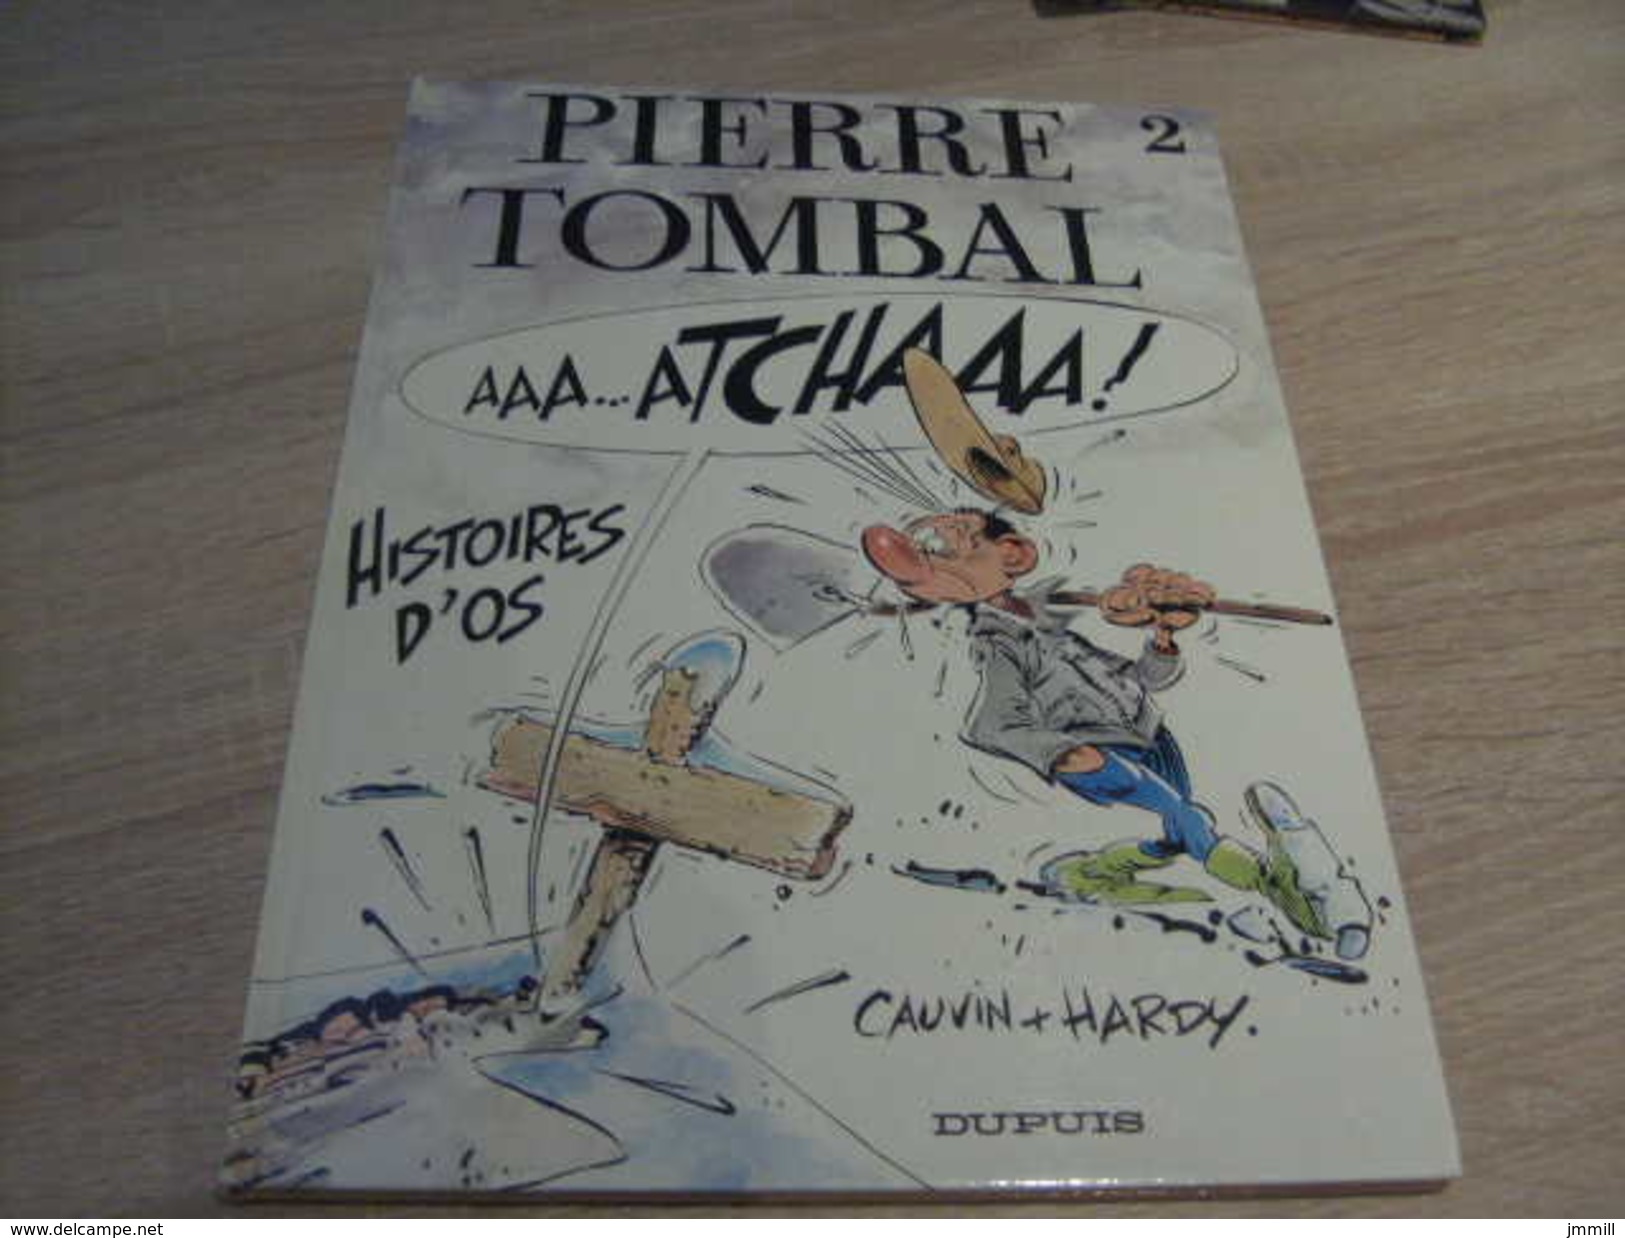 Pierre Tombal Hardy Tome 2 Histoires D'os édition Originale - Pierre Tombal